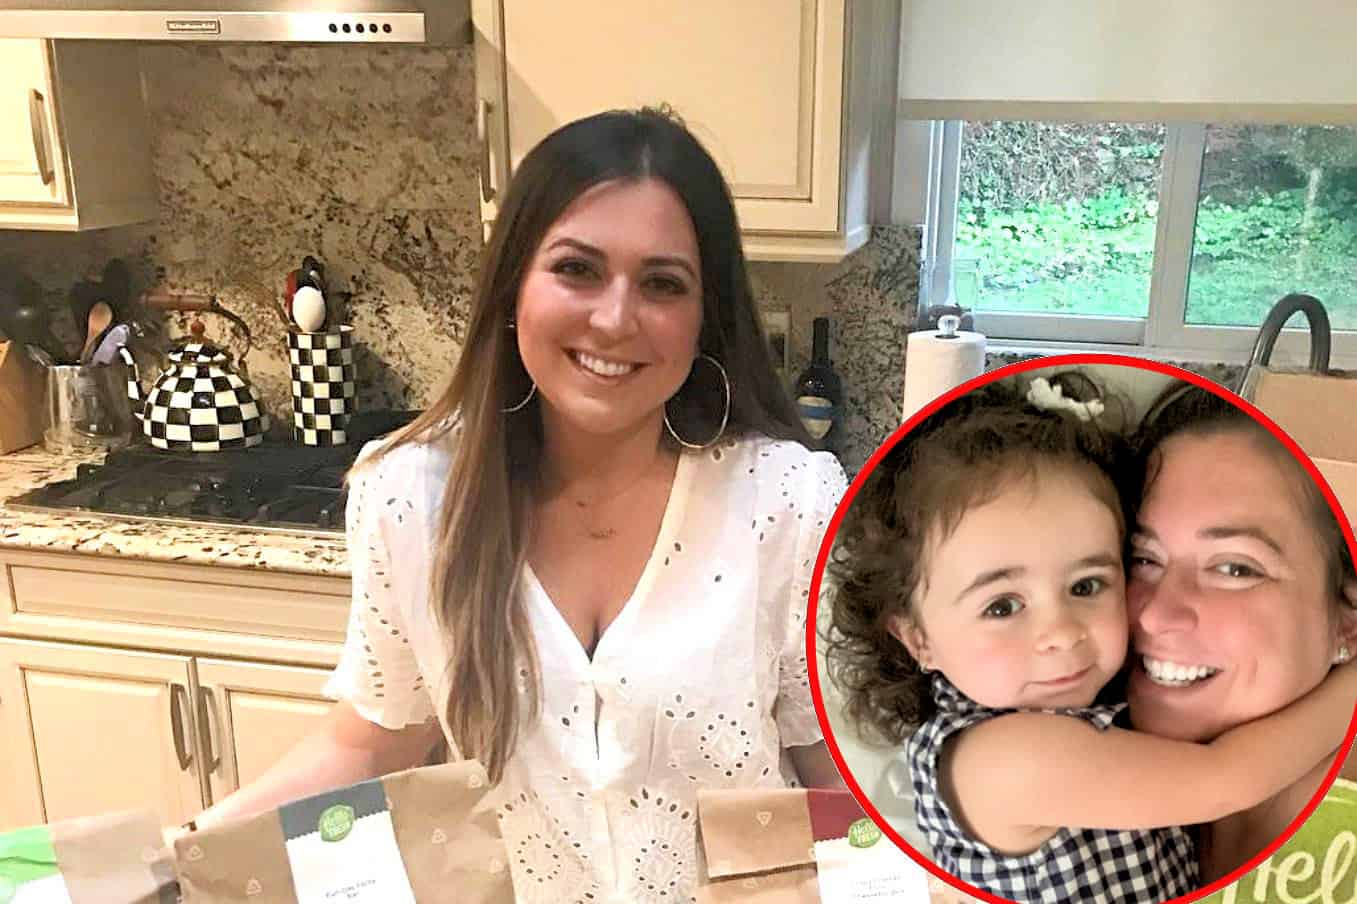 Ex RHONJ Star Lauren Manzo Shares Photos of Daughter Markie Days After She Vowing to Stop Posting Her Following Feud With Social Media Haters